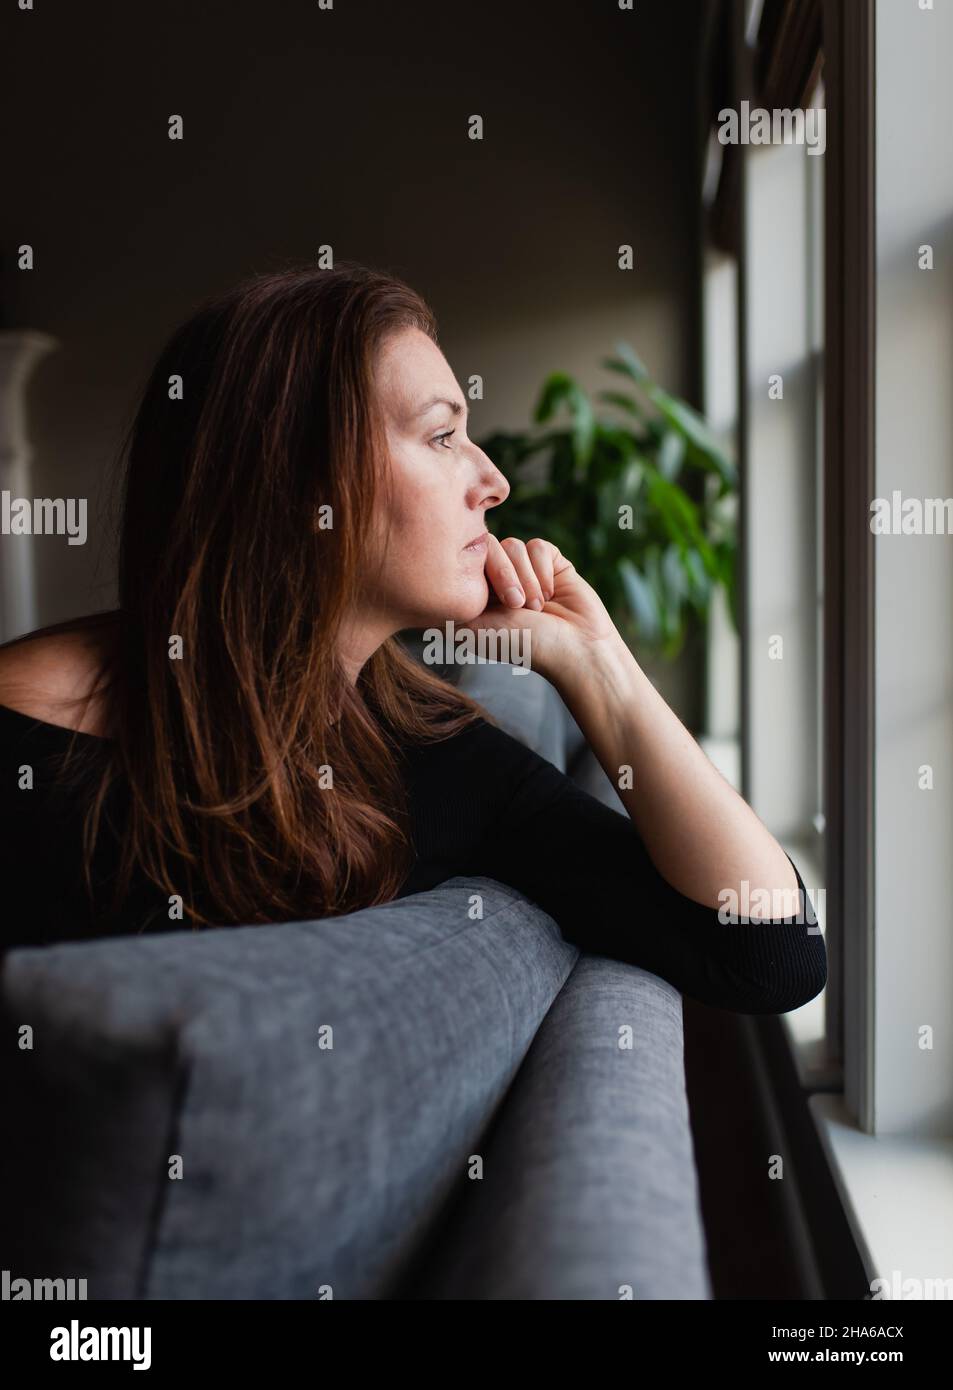 Woman looking thoughtfully out window while sitting on sofa. Stock Photo